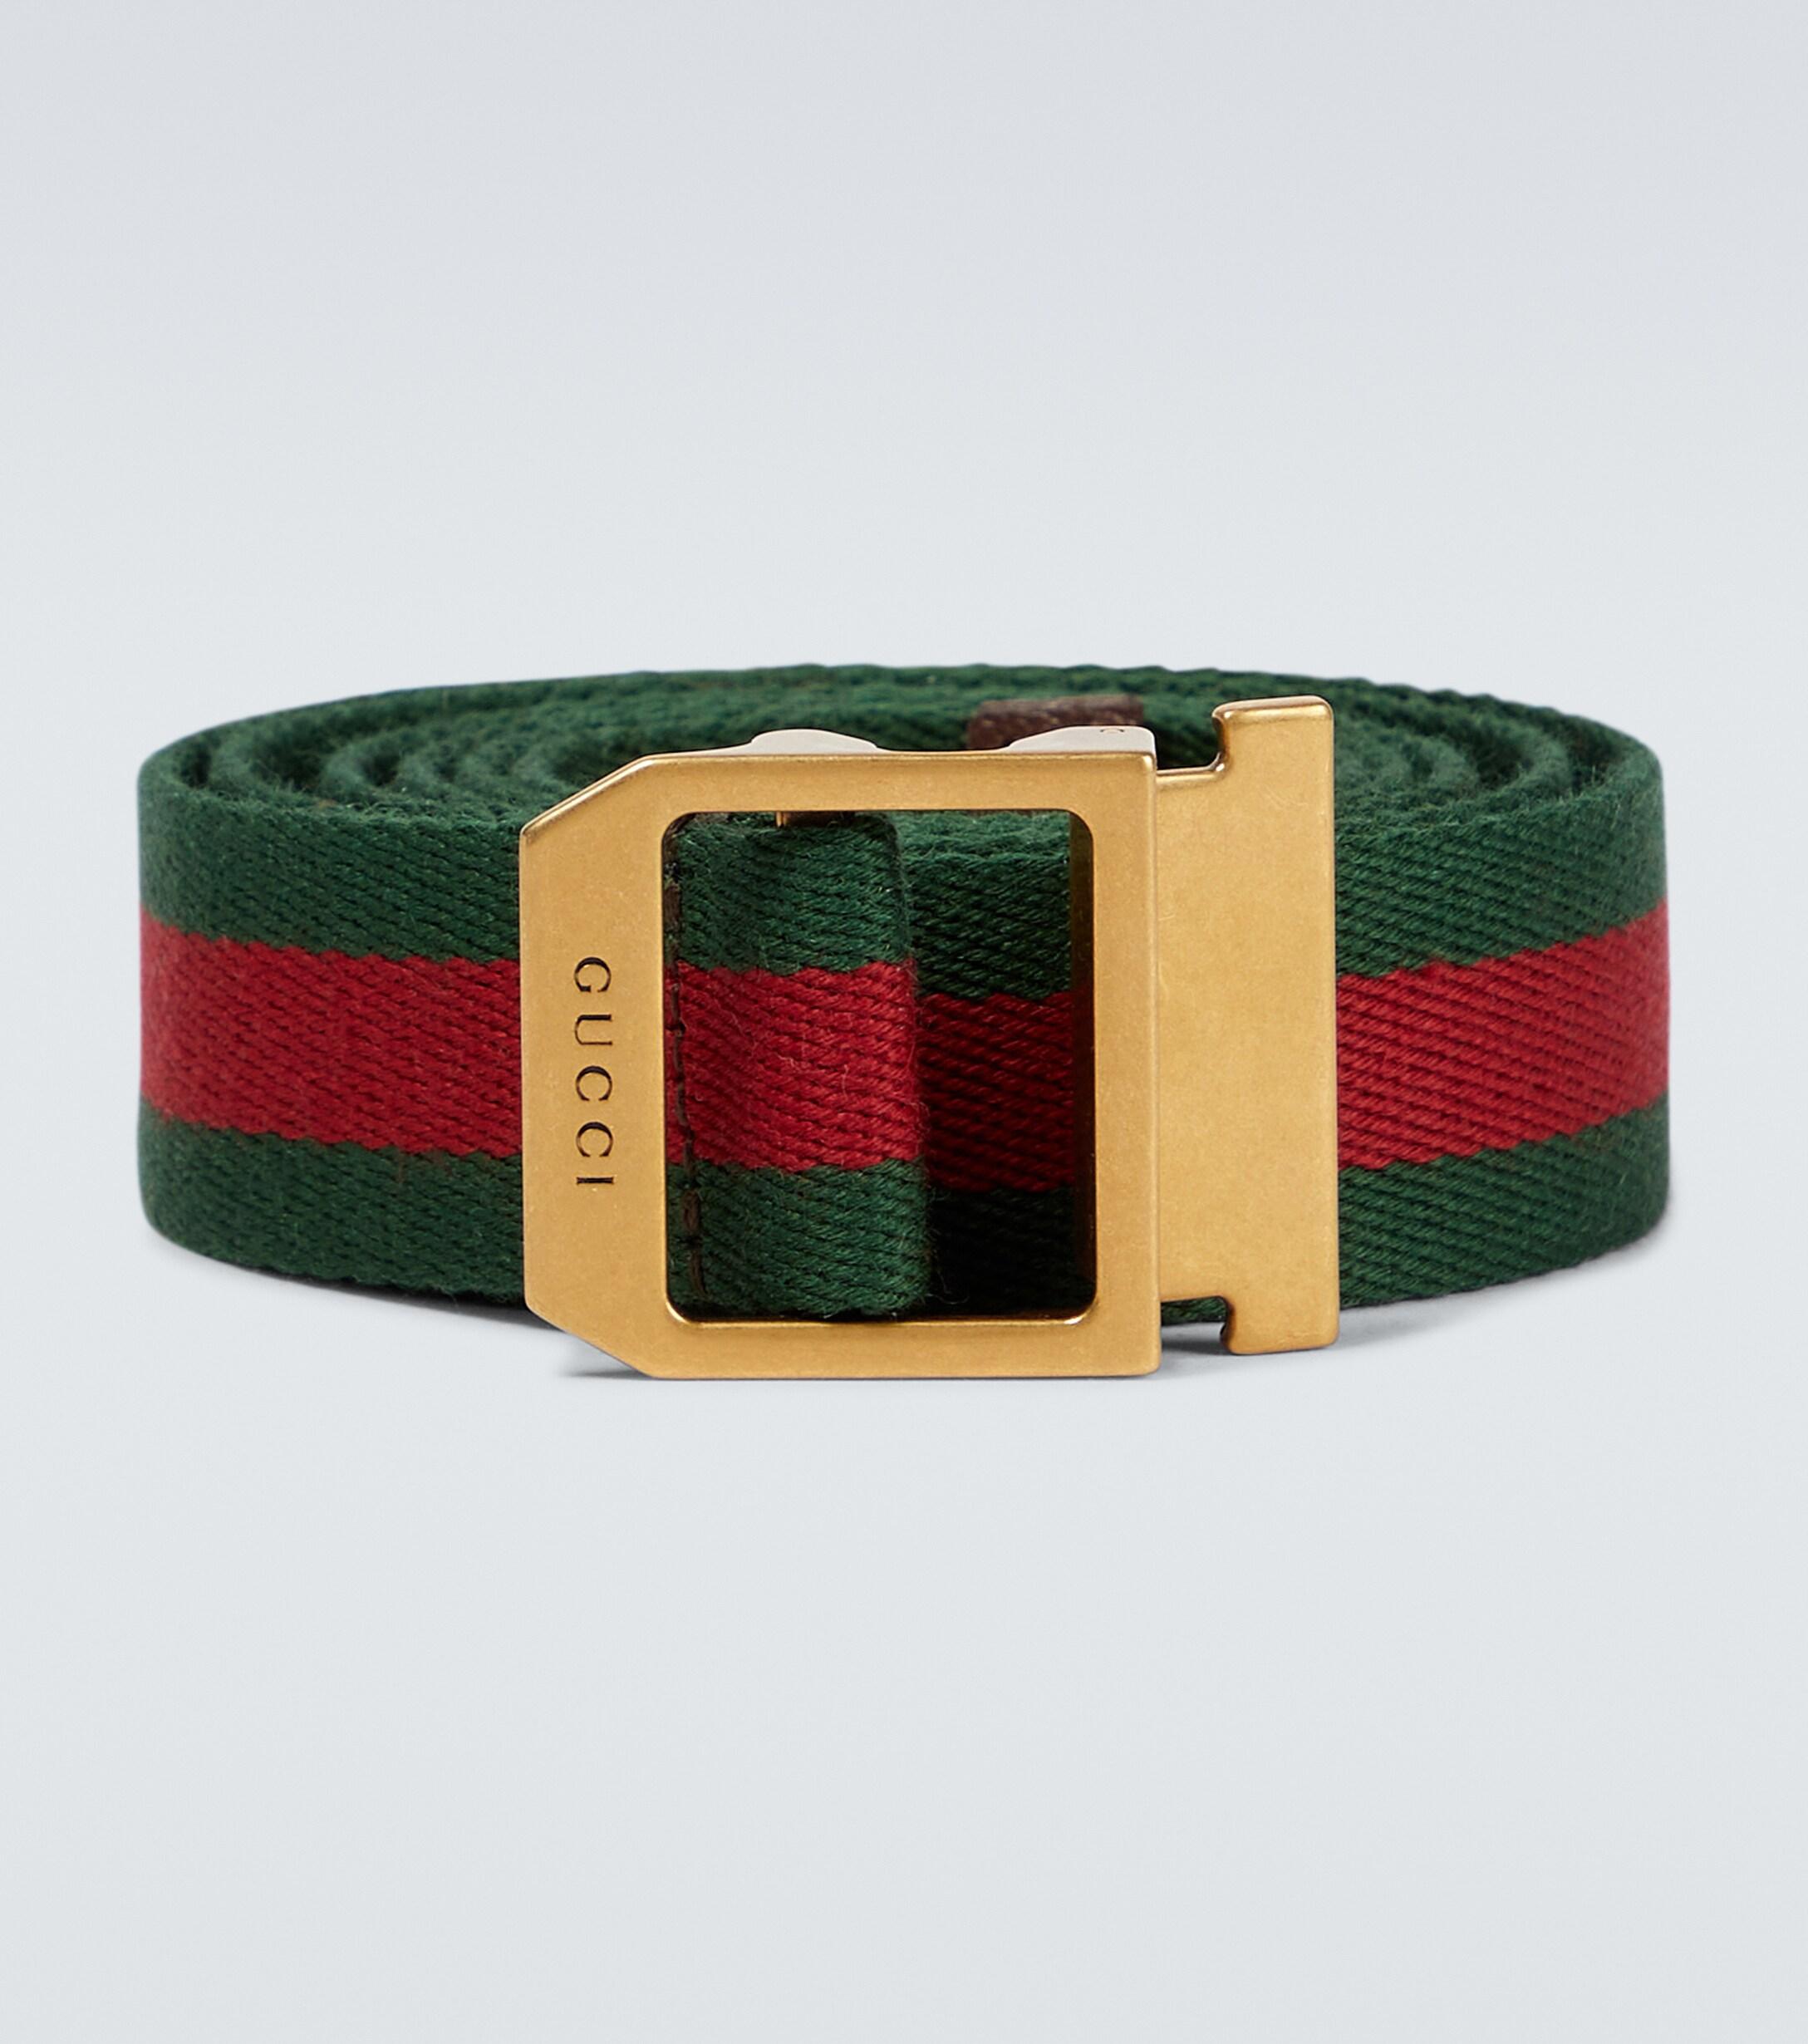 Gucci Belt Black Red And Green | lupon.gov.ph